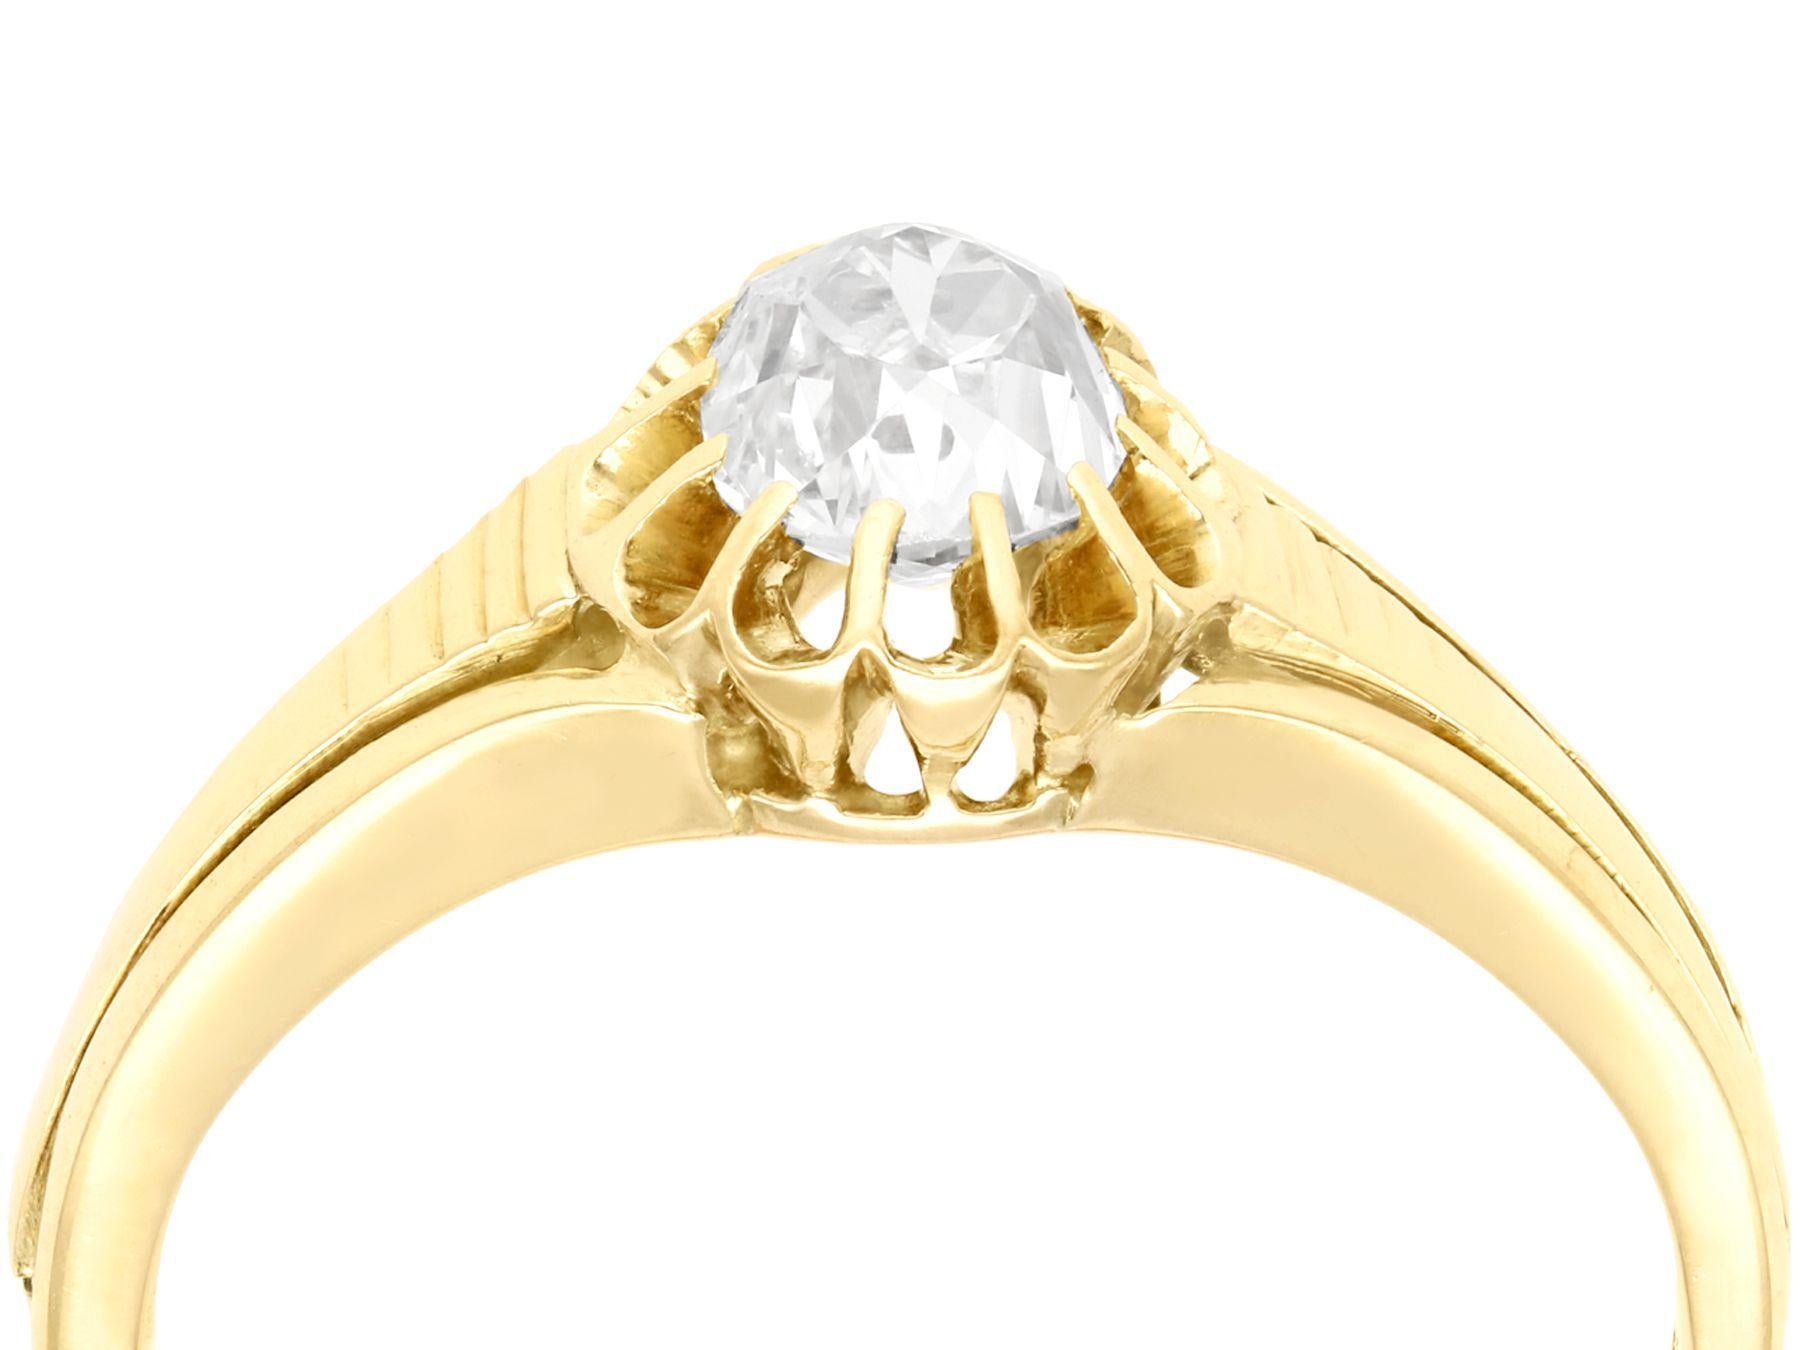 A stunning, fine and impressive antique 0.98 carat diamond and 15 karat yellow gold solitaire ring; part of our diamond jewelry and estate jewelry collections.

This stunning antique diamond solitaire ring has been crafted in 15k yellow gold.

The